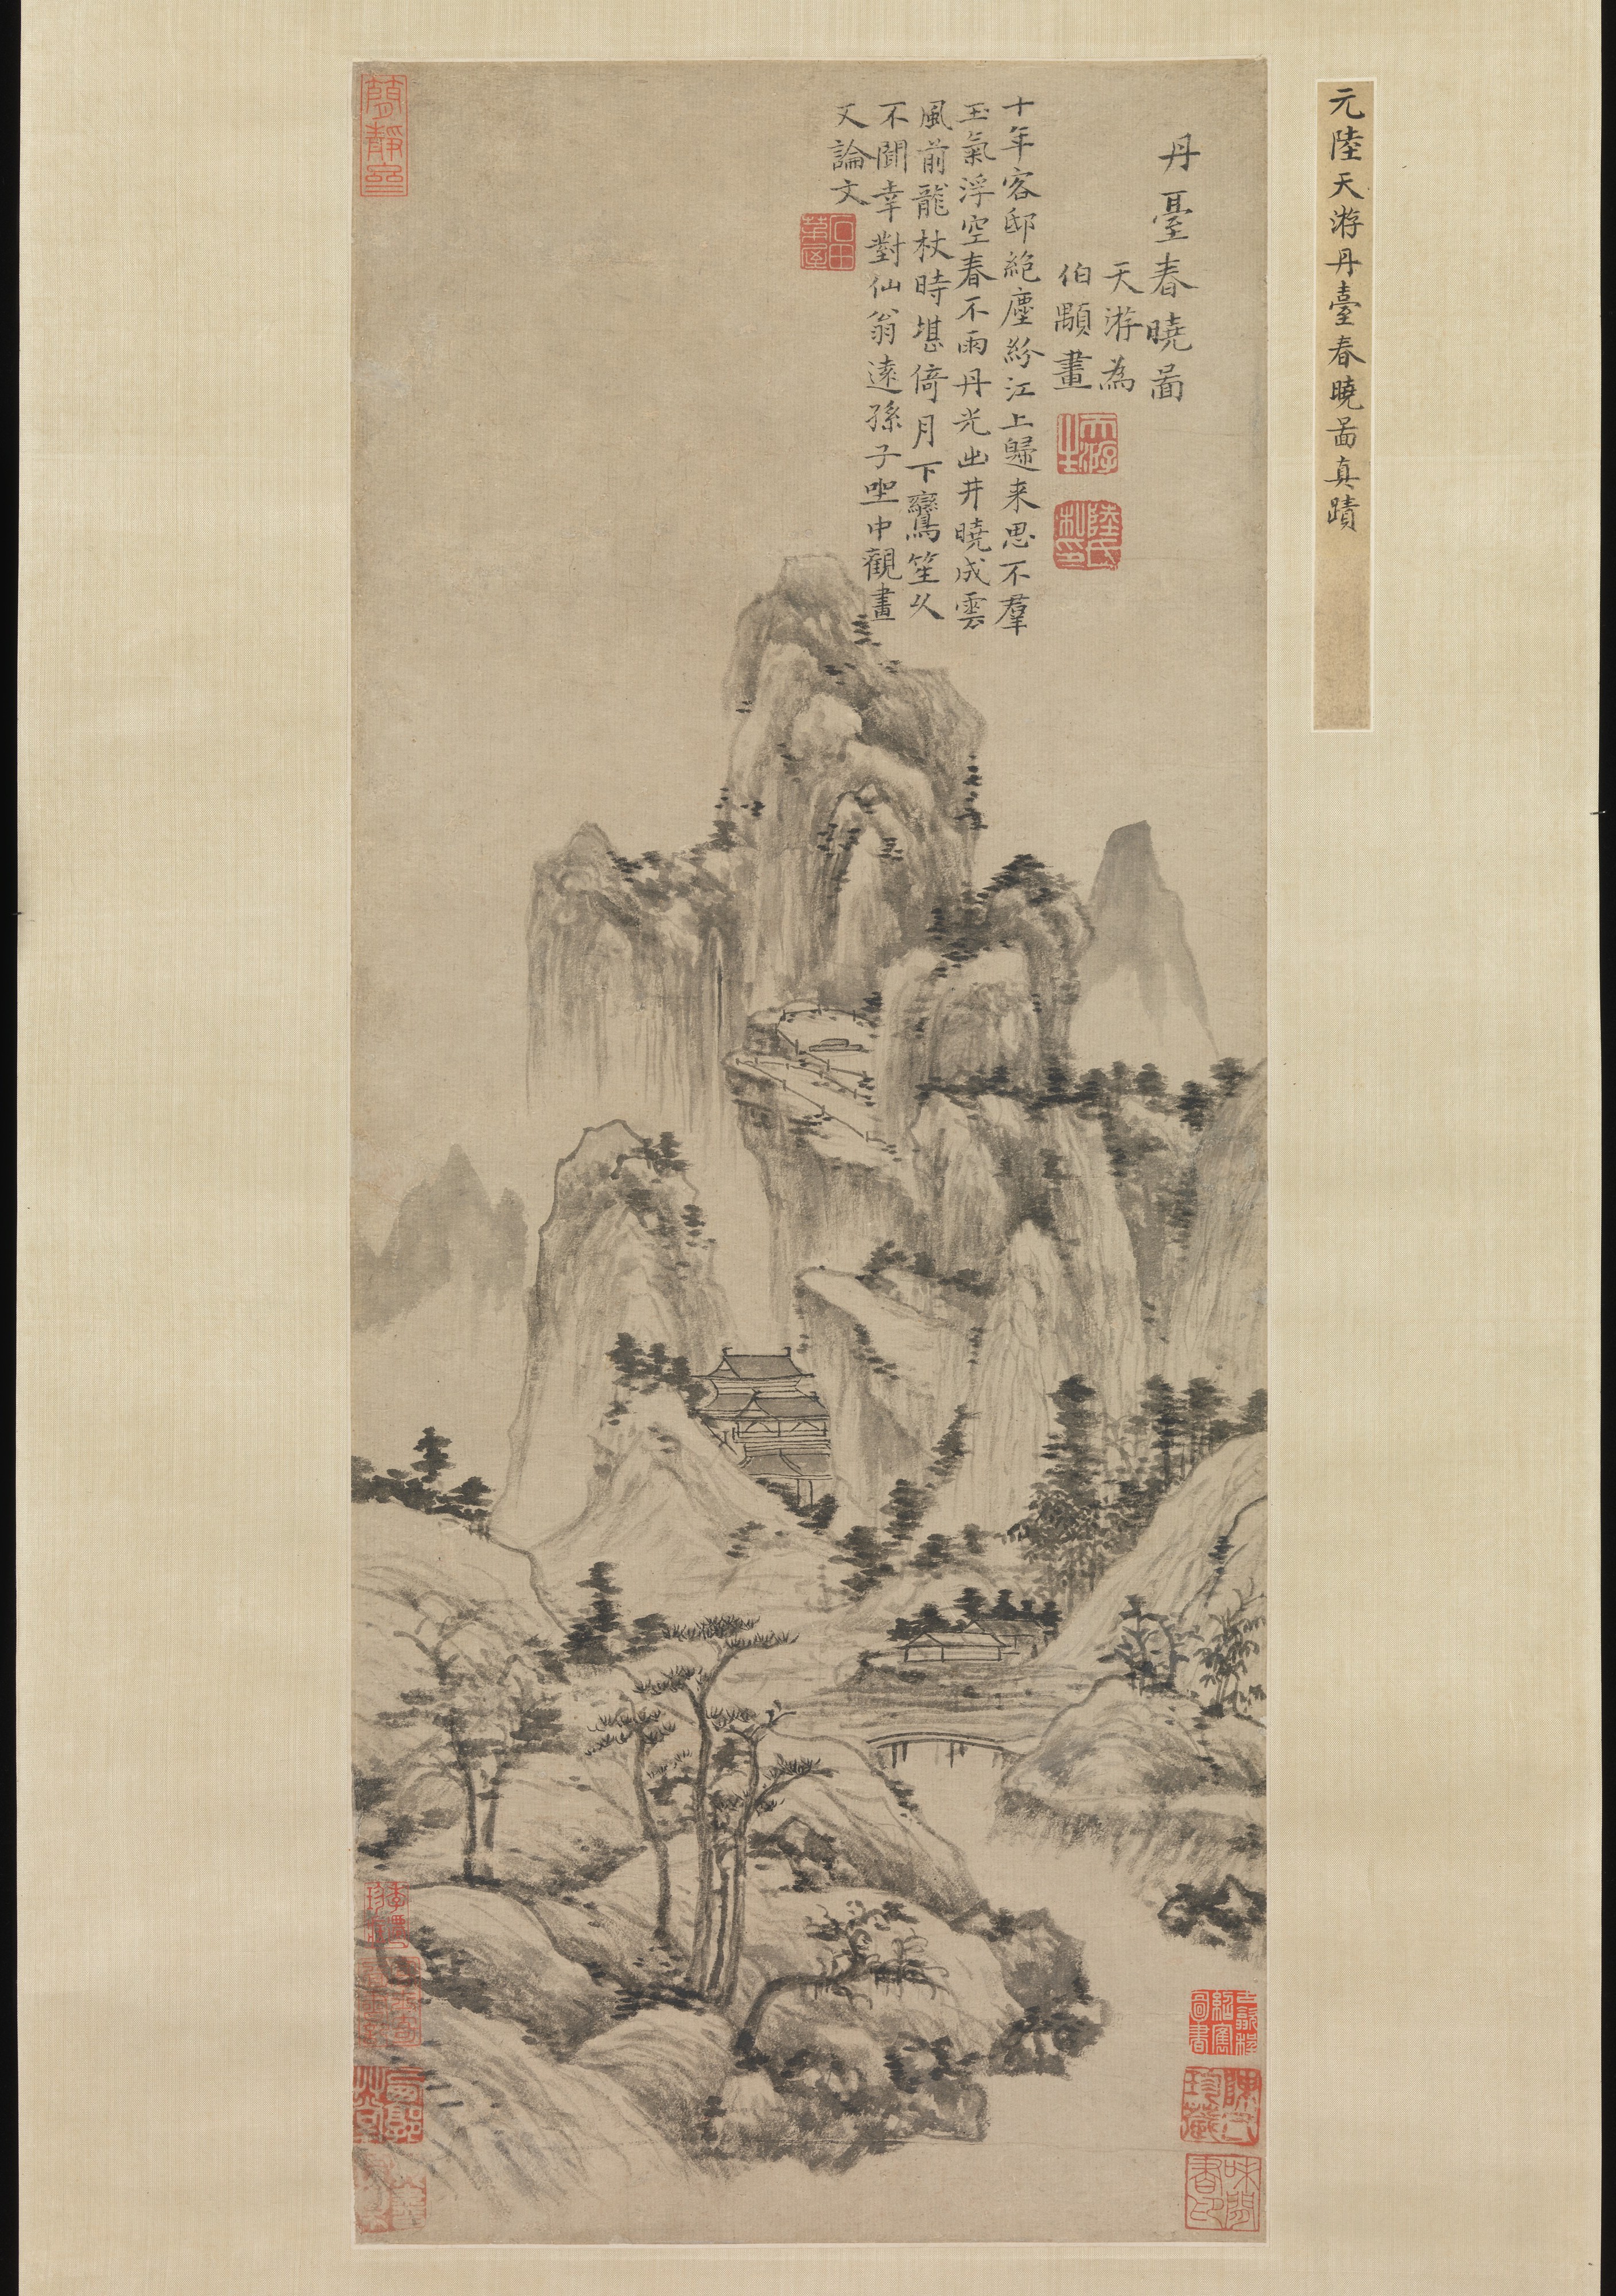 Beyond The Sacred Mountains: New Chinese Ink Paintings